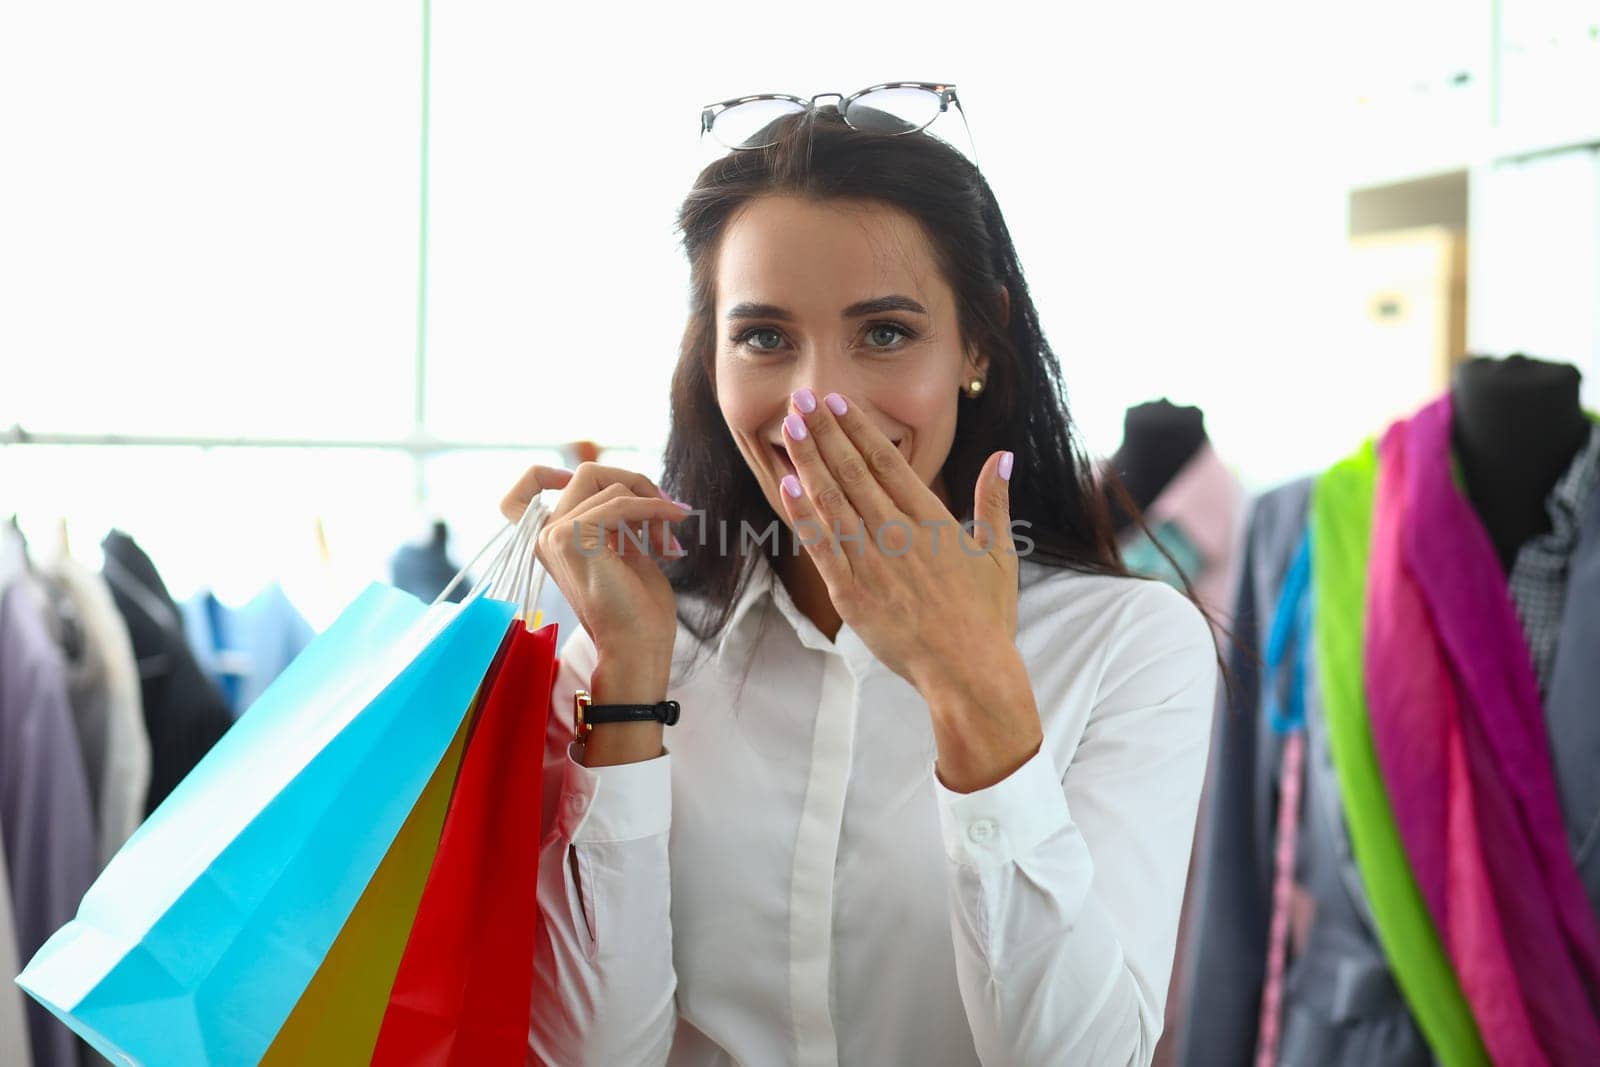 Laughing happy joyful woman with shopping bags in fashionable clothing store. Promotions with discounts and shopping for pleasure